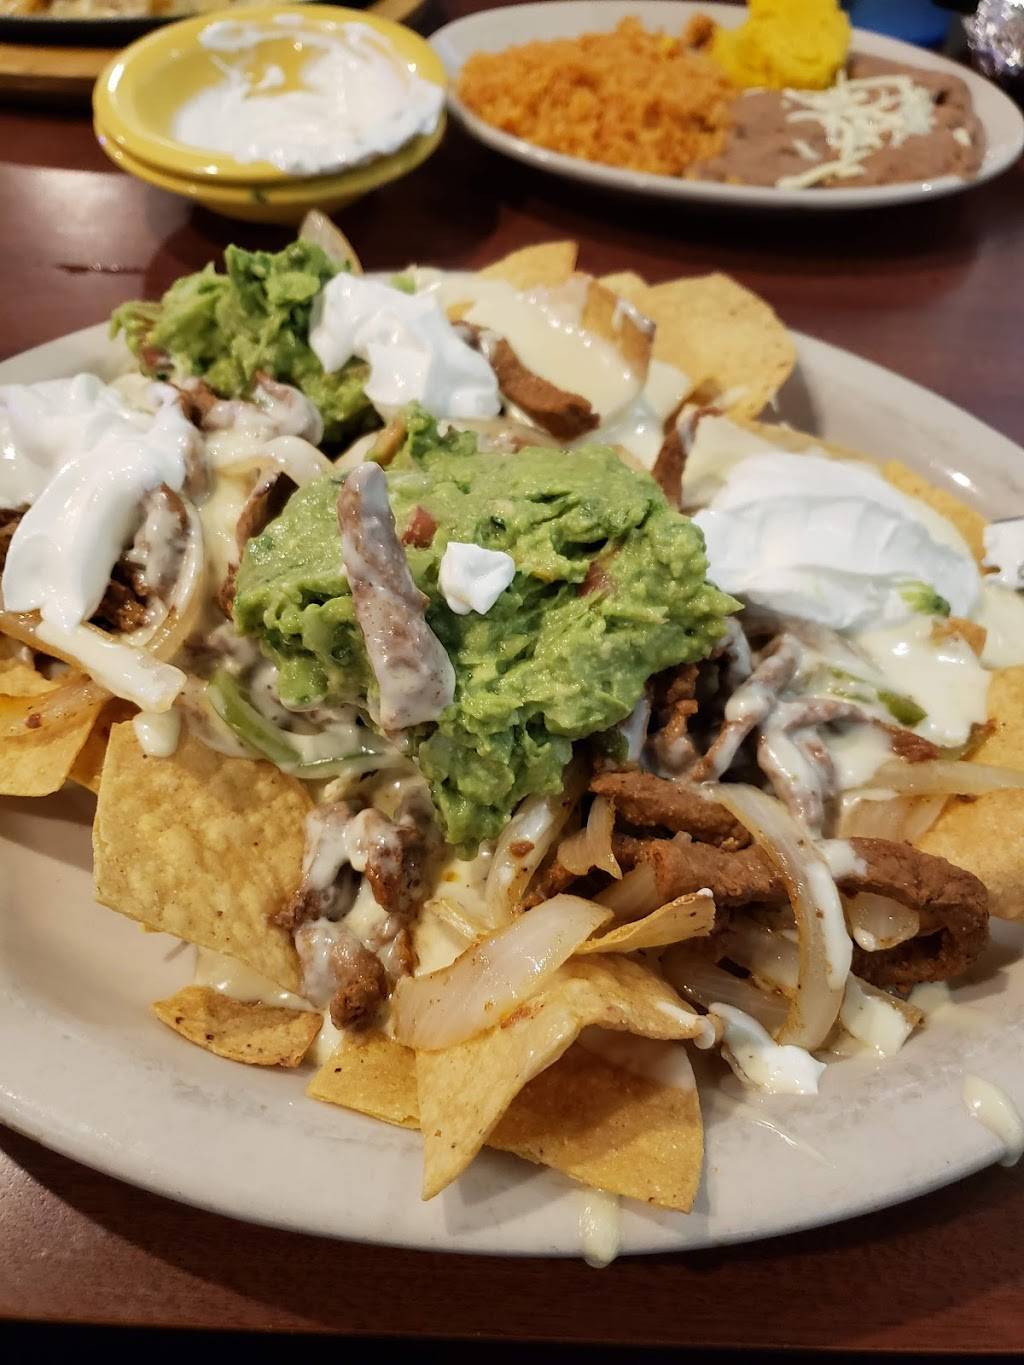 Zapatas Mexican Restaurant | restaurant | 4660 N Illinois St, Fairview Heights, IL 62208, USA | 6182775474 OR +1 618-277-5474